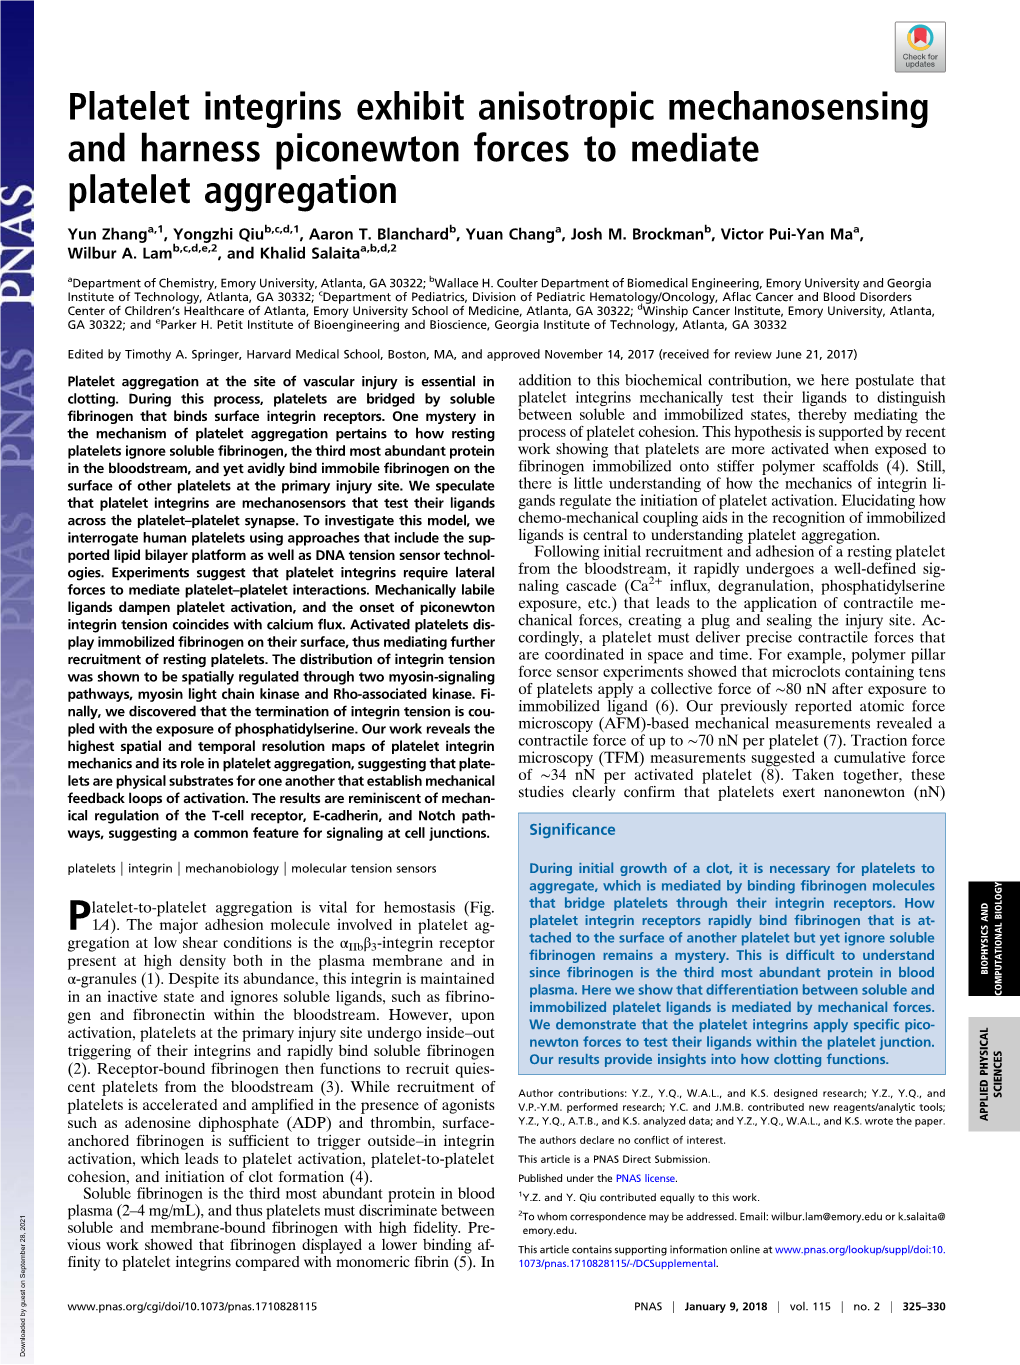 Platelet Integrins Exhibit Anisotropic Mechanosensing and Harness Piconewton Forces to Mediate Platelet Aggregation